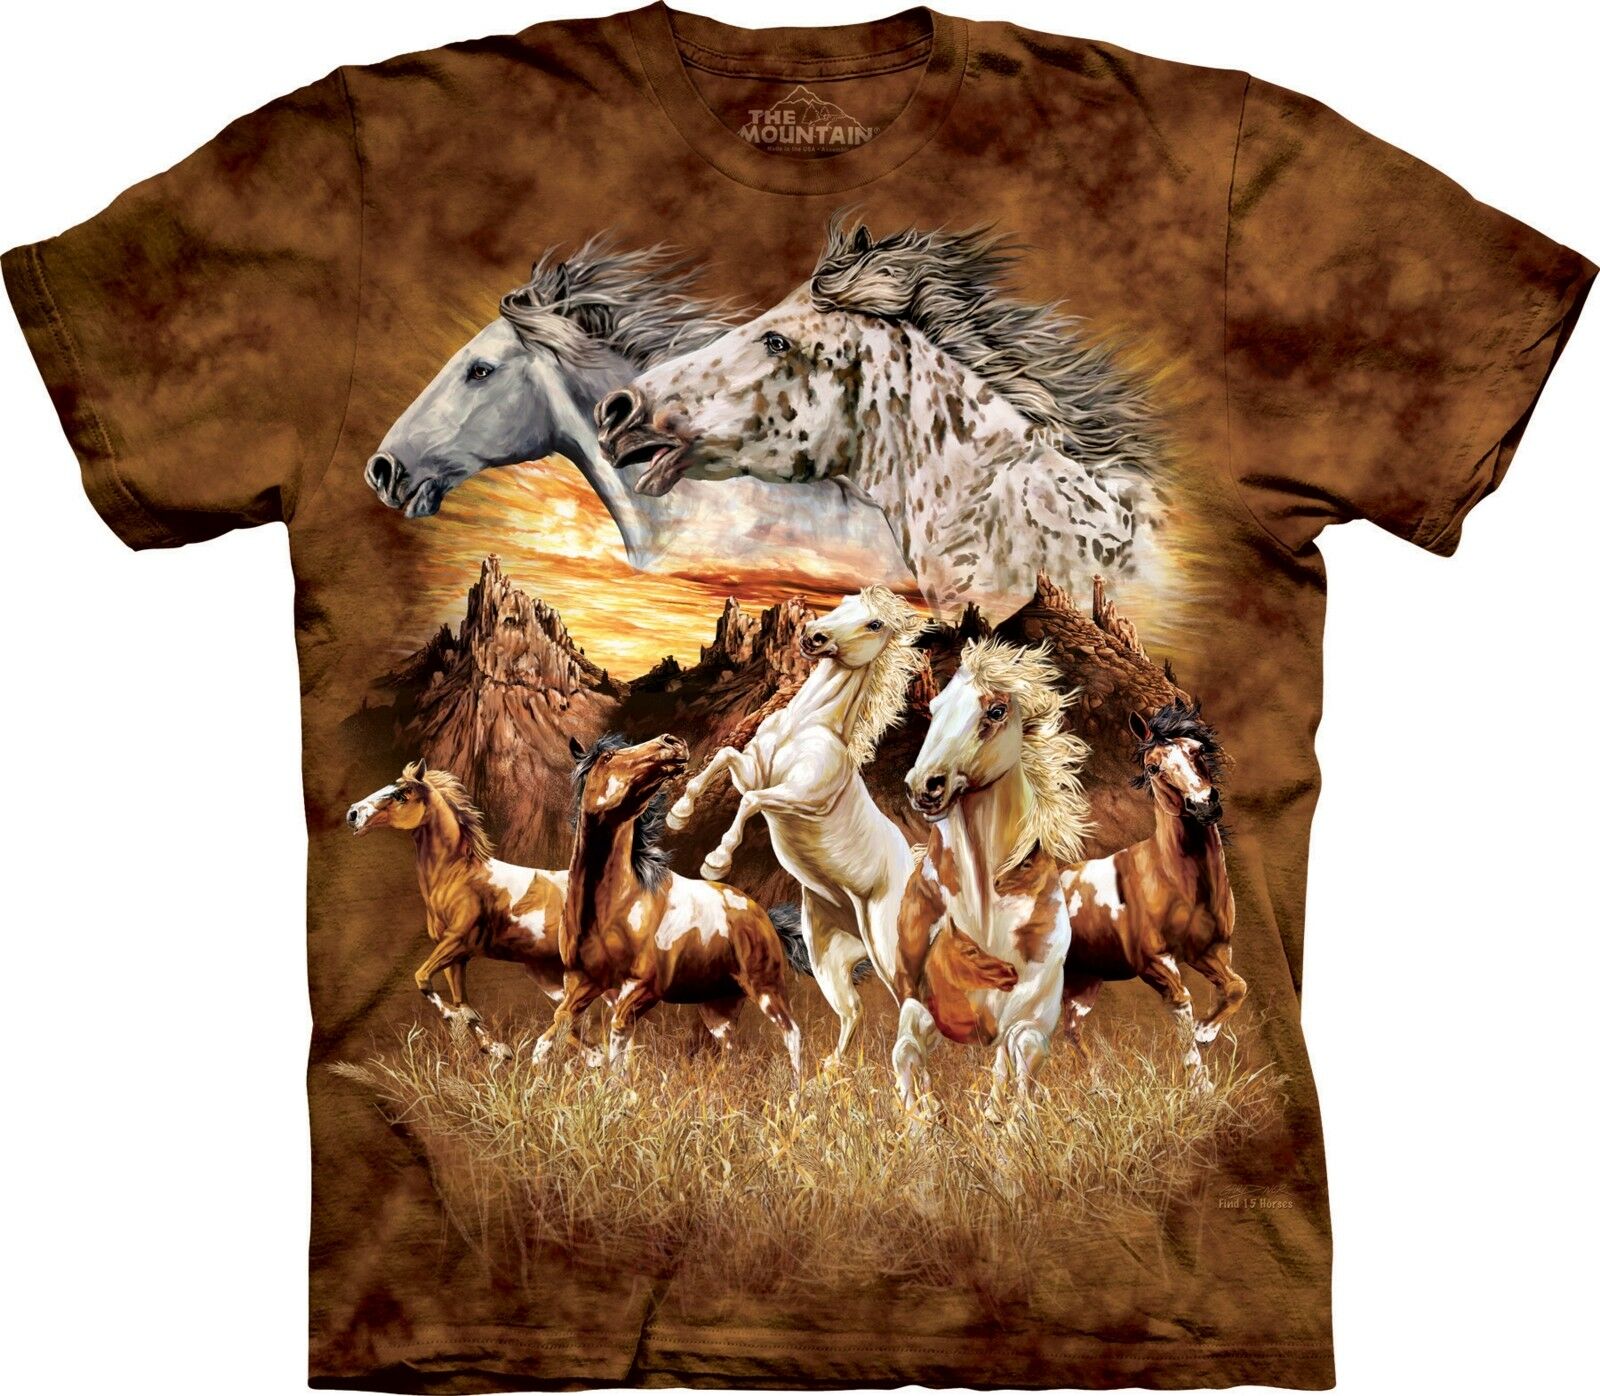 The Mountain Find 15 Horses Equine Appaloosa Paint T-Shirt Adult (Sm - 3x)